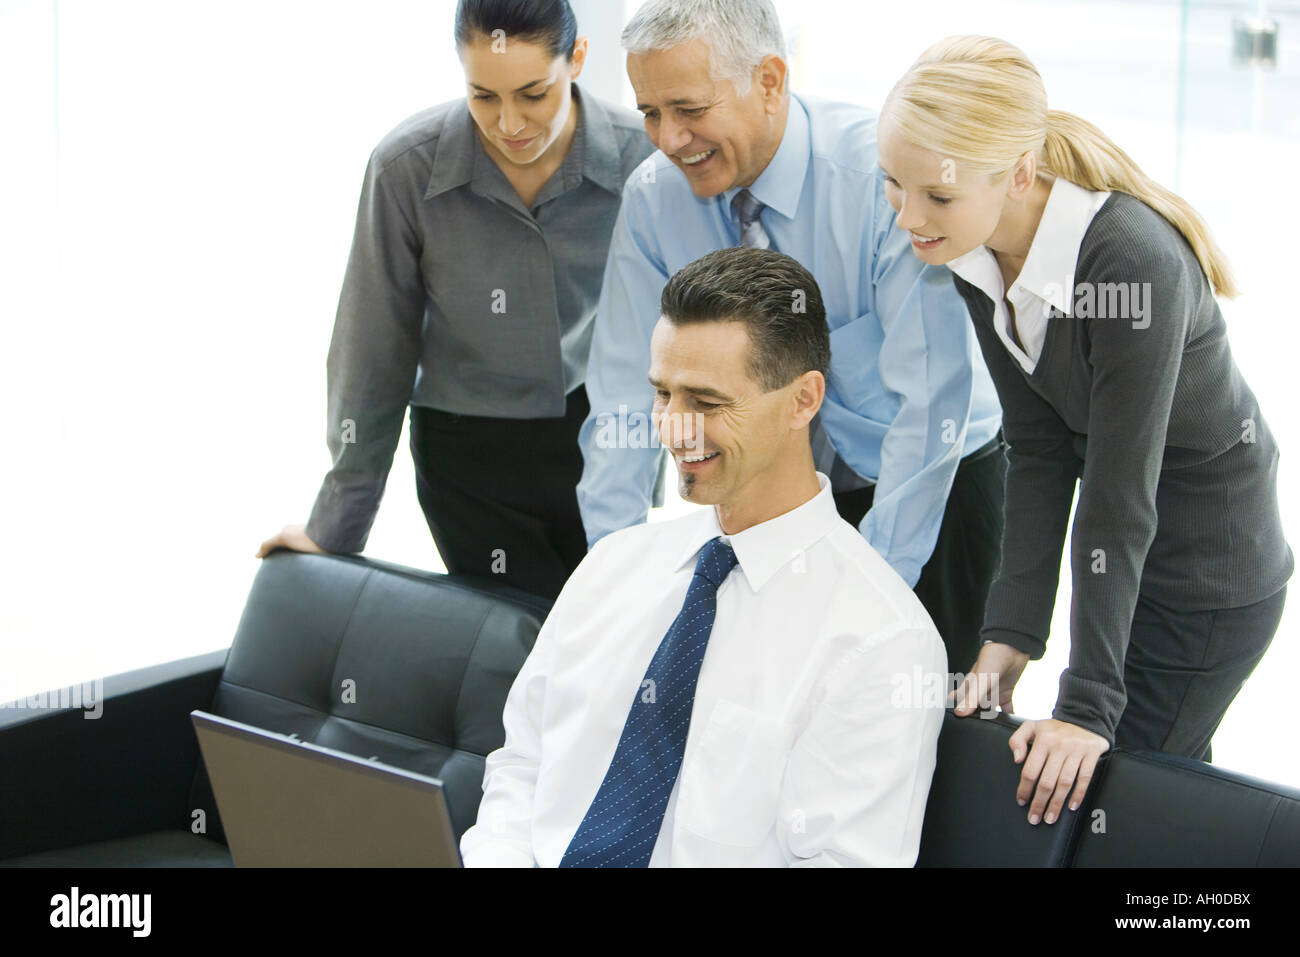 Businessman using laptop while colleagues look over shoulder Stock Photo